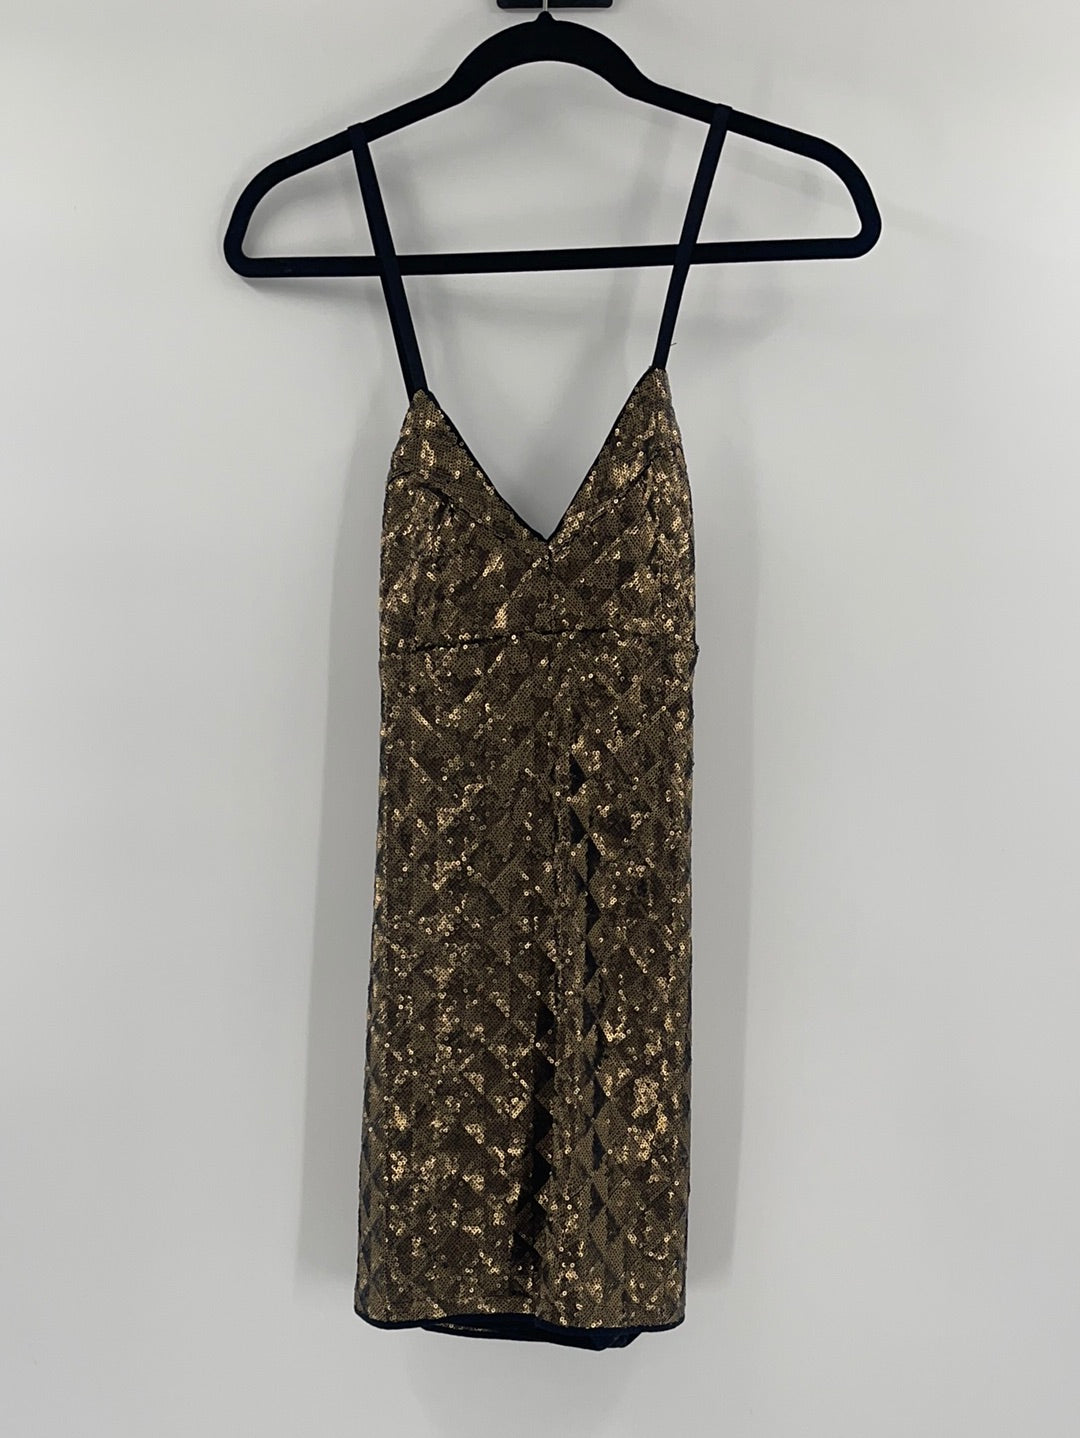 Urban Outfitters - Kendall + Kylie - Gold Sequin Sleeveless Low Back Adjustable Straps Romper (Size M)